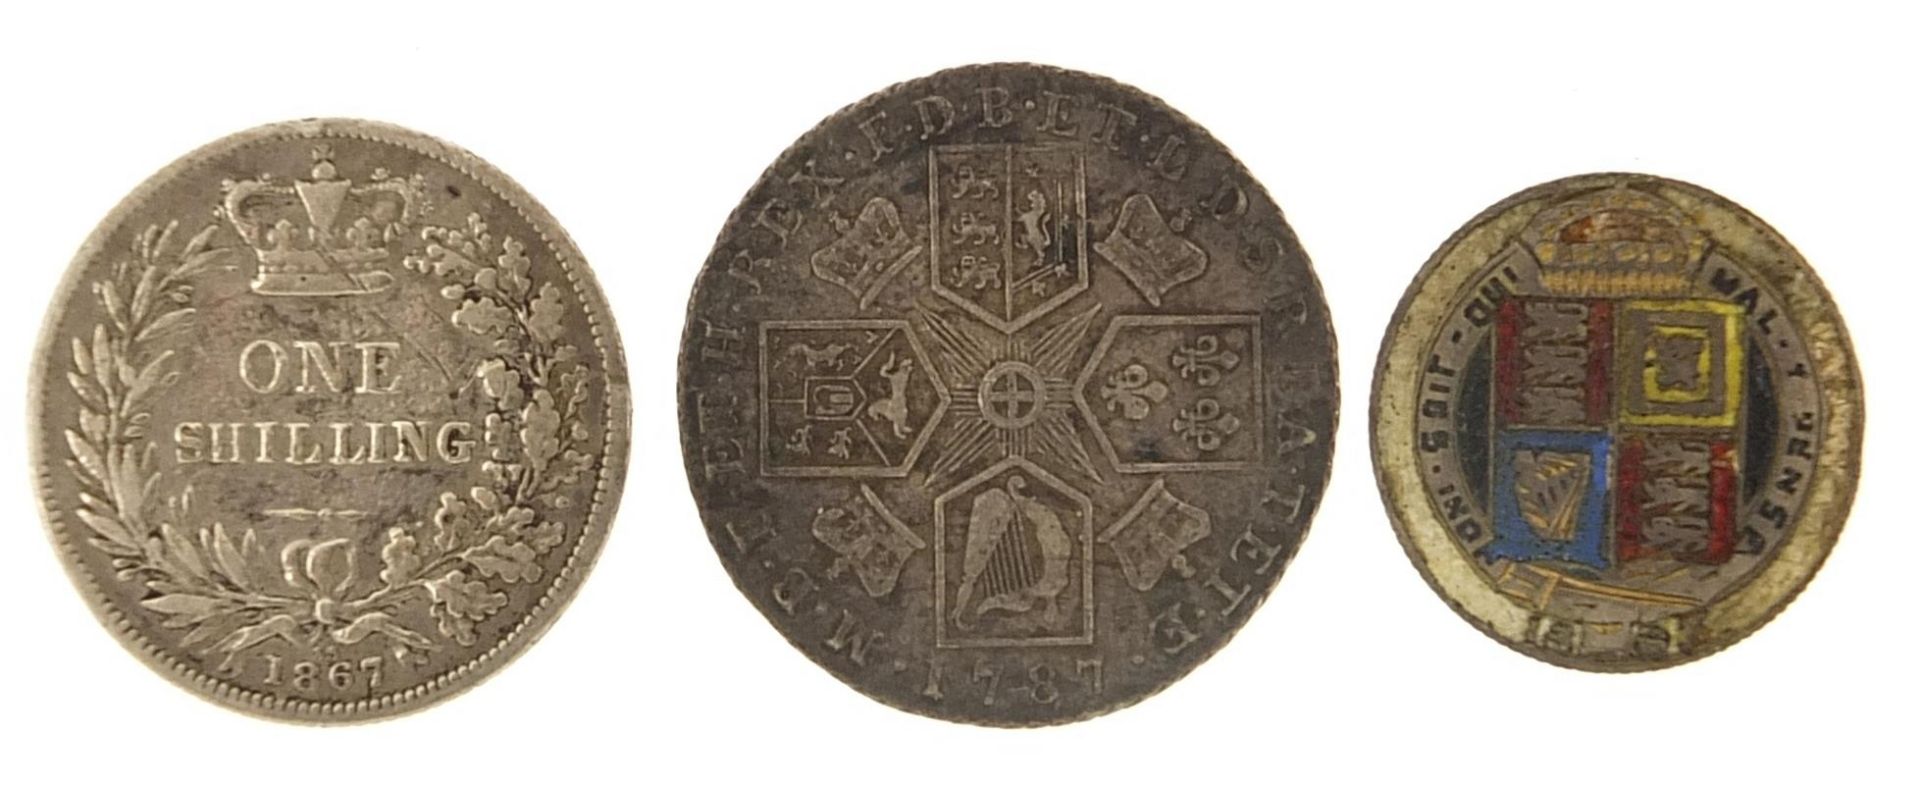 George III and later silver coinage comprising 1787 and 1867 shillings and an 1887 enamelled